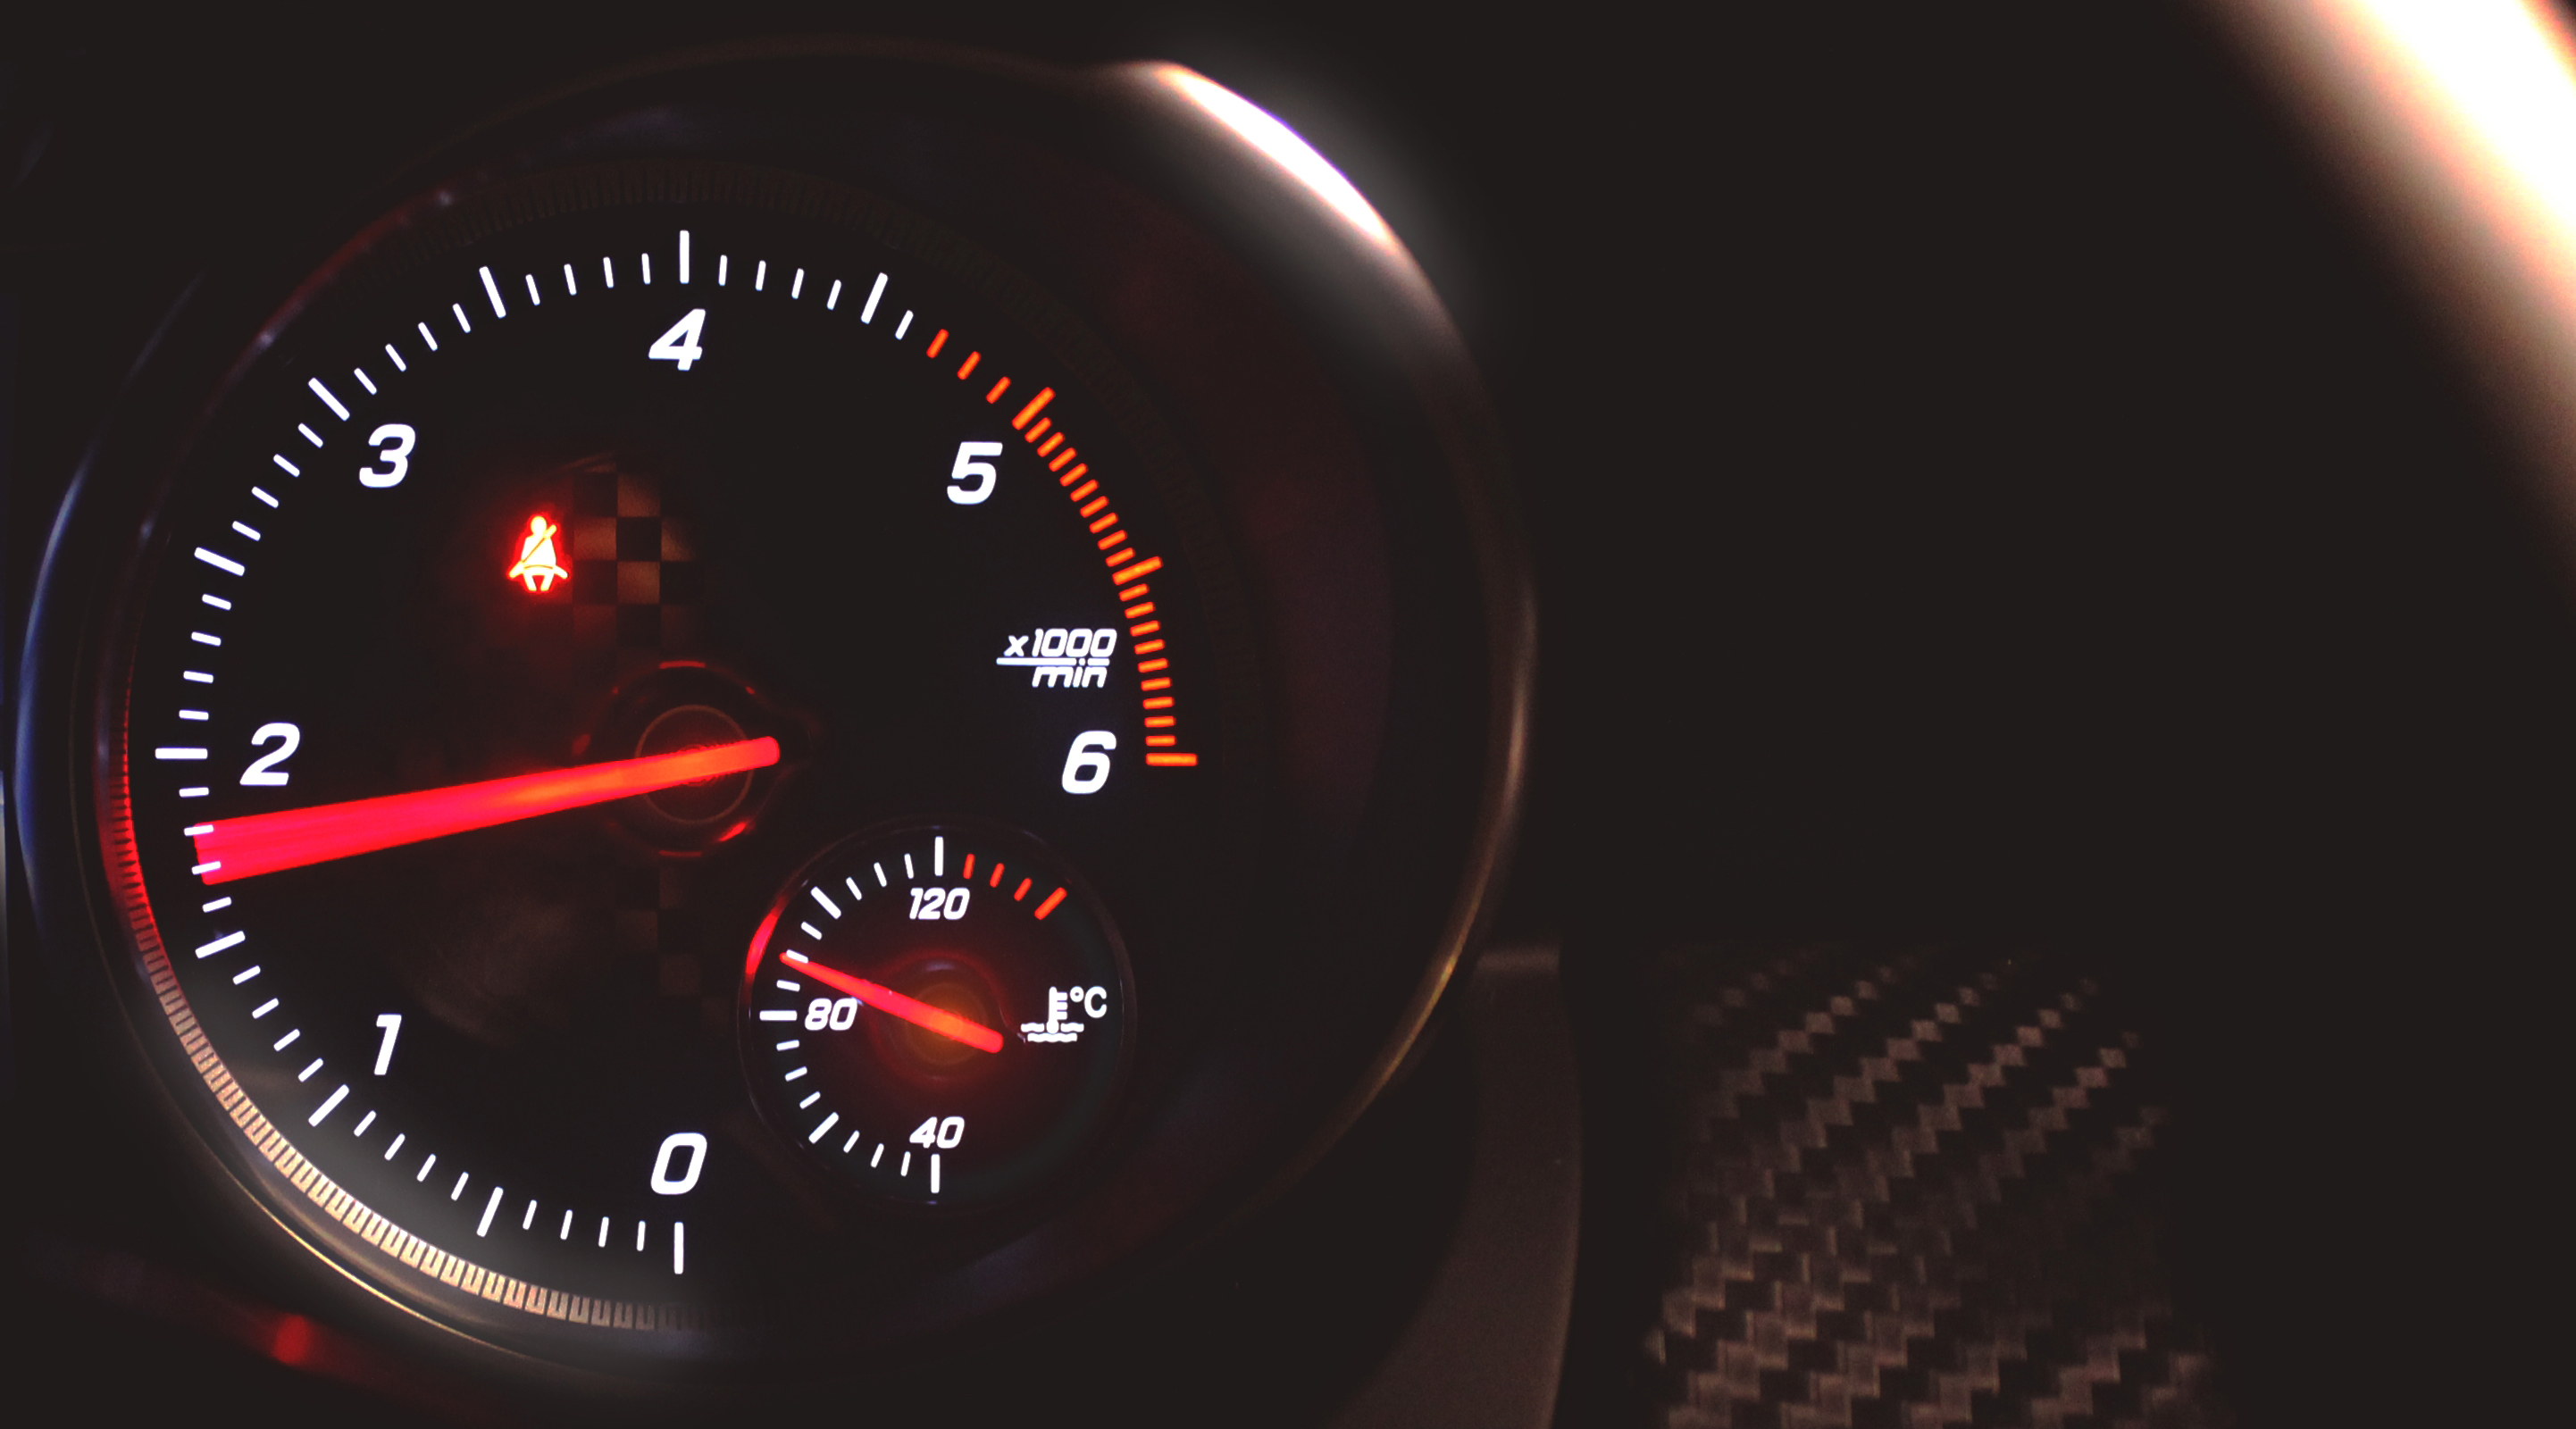 Sports Car Tachometer Speeding - With Copyspace, Abstract, Power, Instrument, Interior, HQ Photo